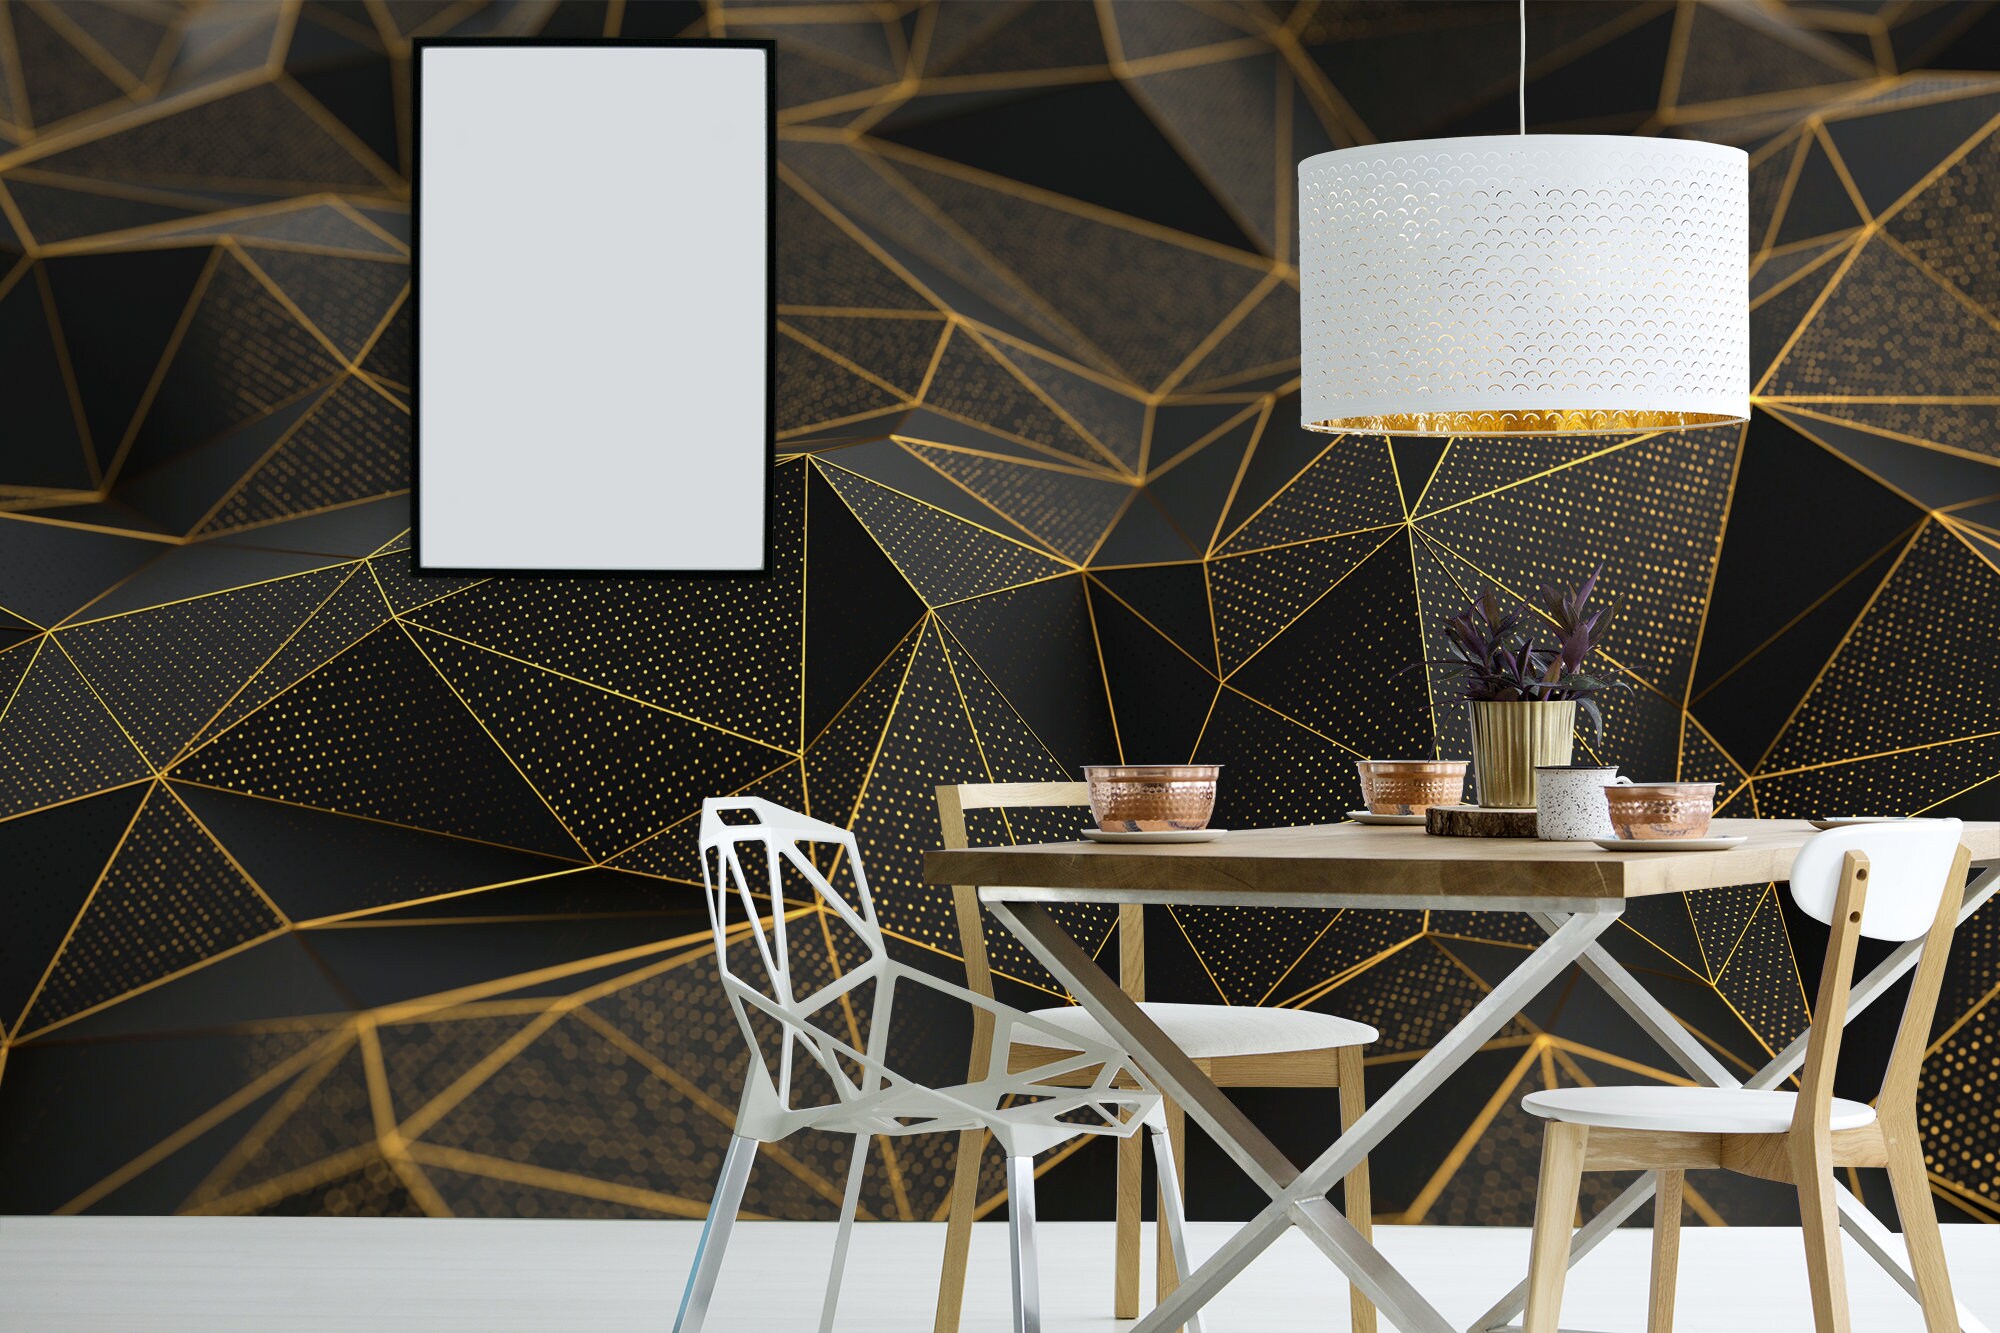 Yasinet Black and Gold Peel and Stick Wallpaper Black Geometric Contact Paper Stripe Removable Paper Self Adhesive Wallpaper Decorative for Wall